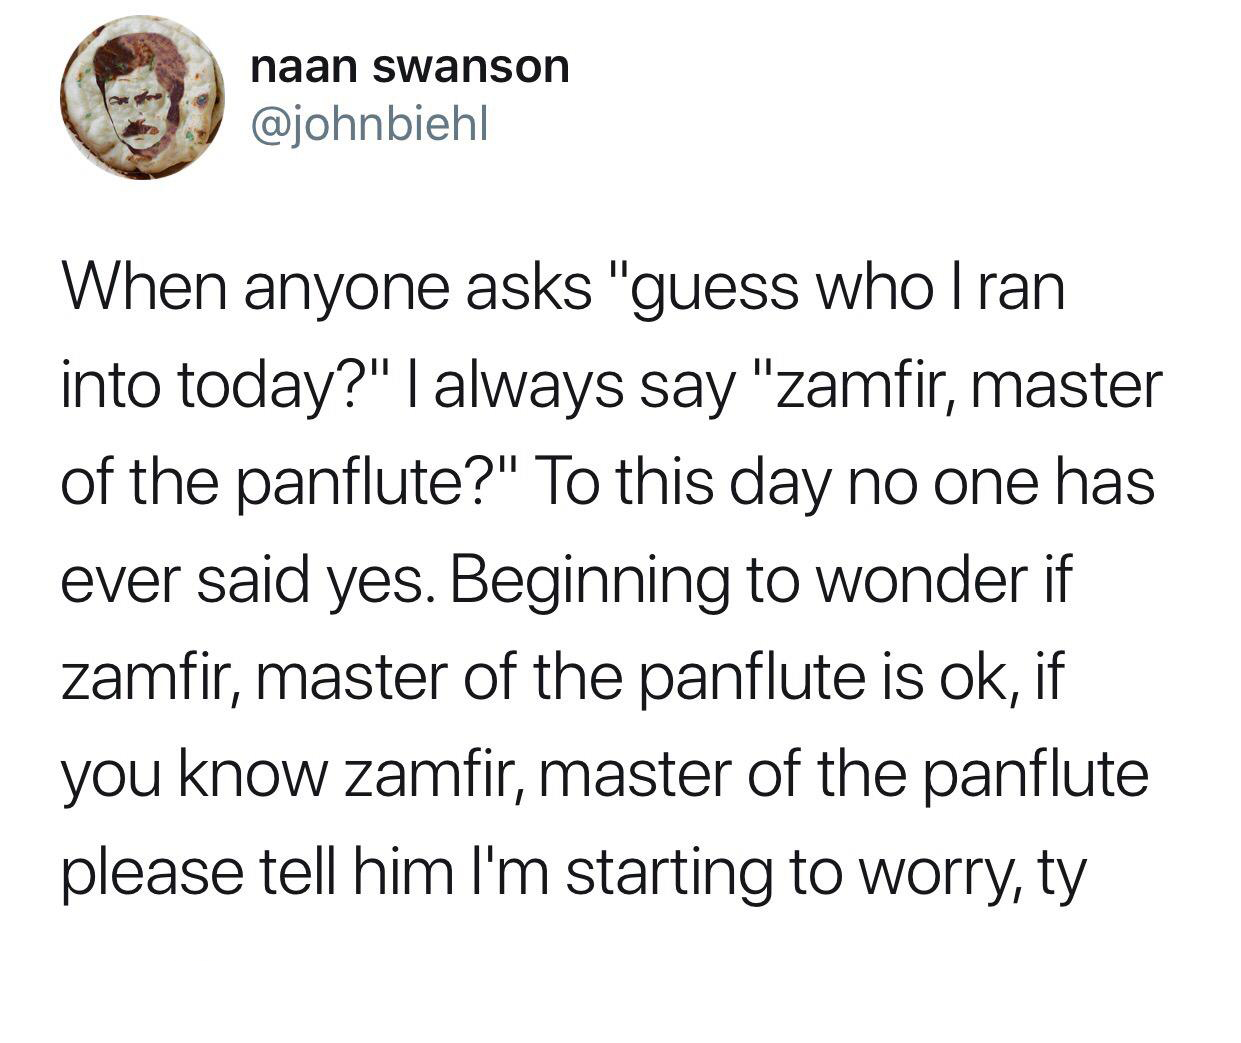 named my stomach budapest - naan swanson When anyone asks "guess who Iran into today?" I always say "zamfir, master of the panflute?" To this day no one has ever said yes. Beginning to wonder if zamfir, master of the panflute is ok, if you know zamfir, ma